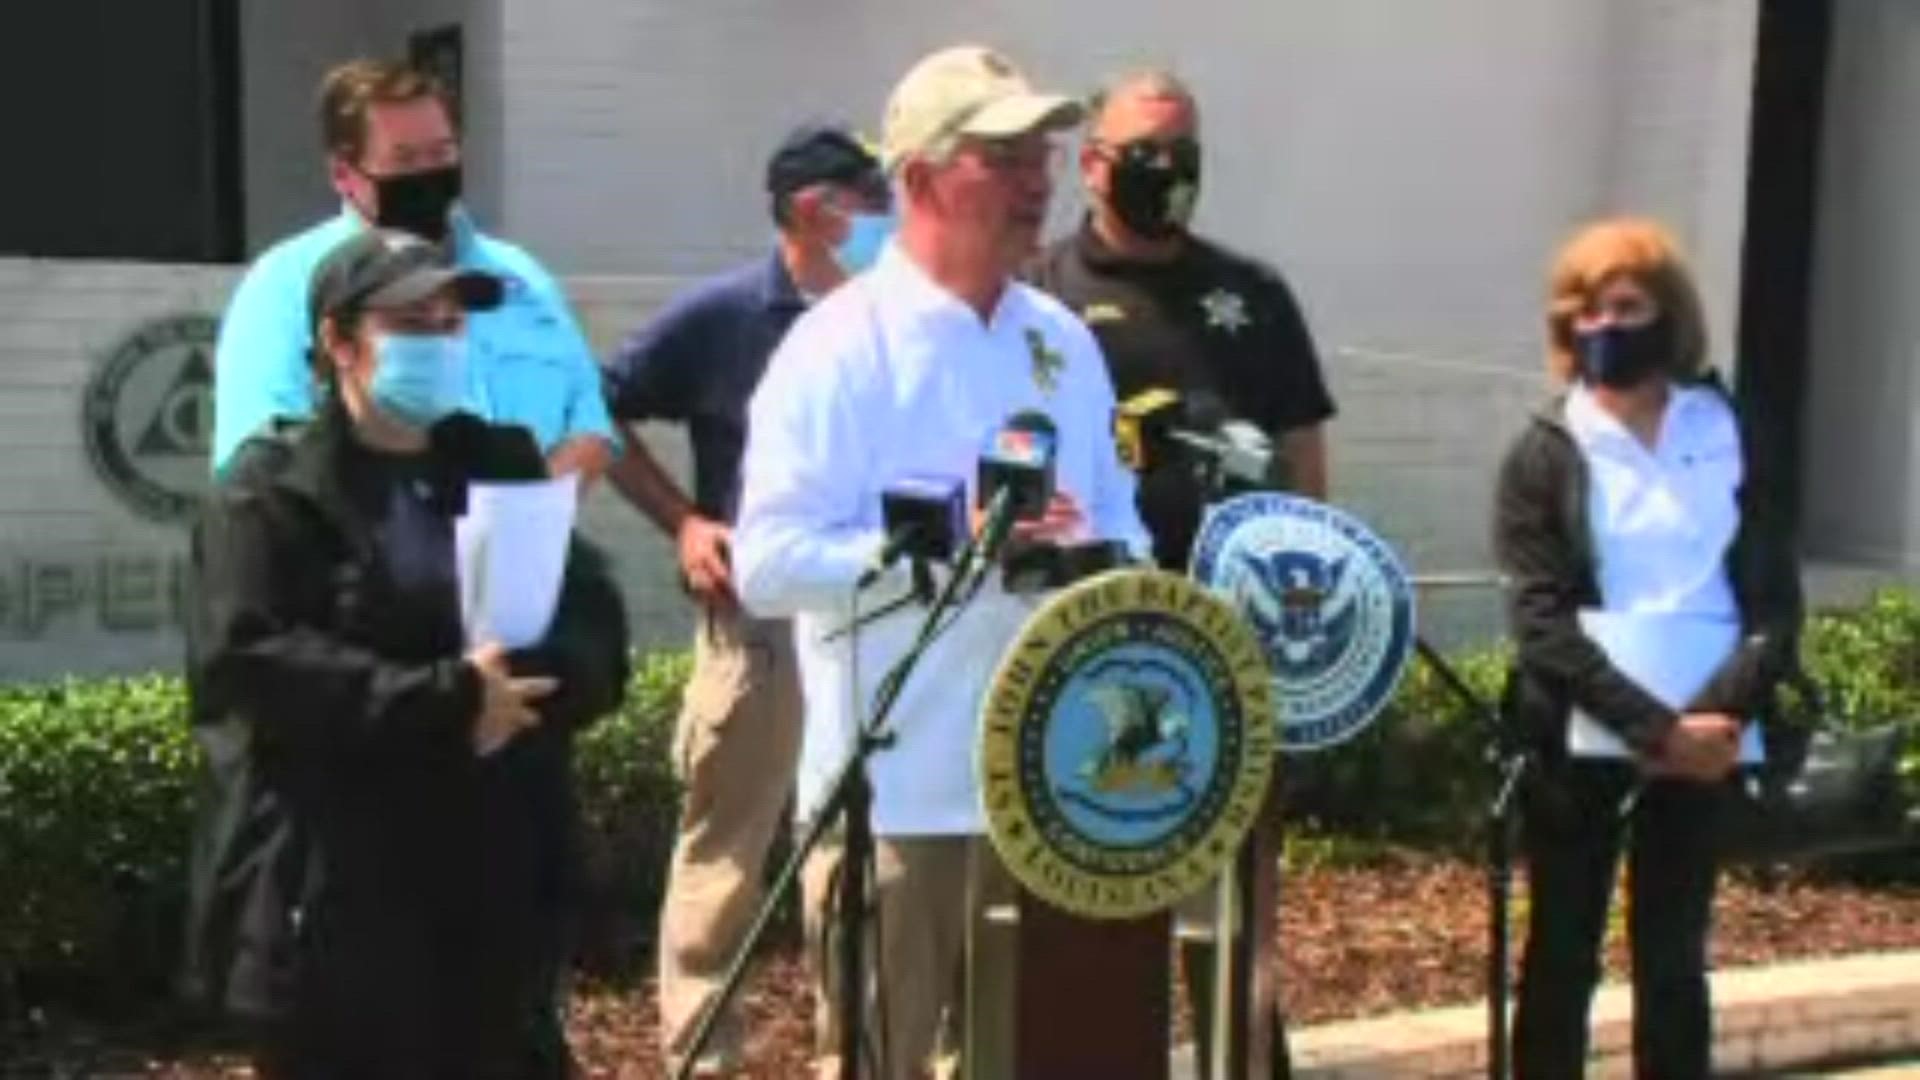 Gov. John Bel Edwards and other officials give an update on the response to the damage caused by Hurricane Ida, looters and power outages.